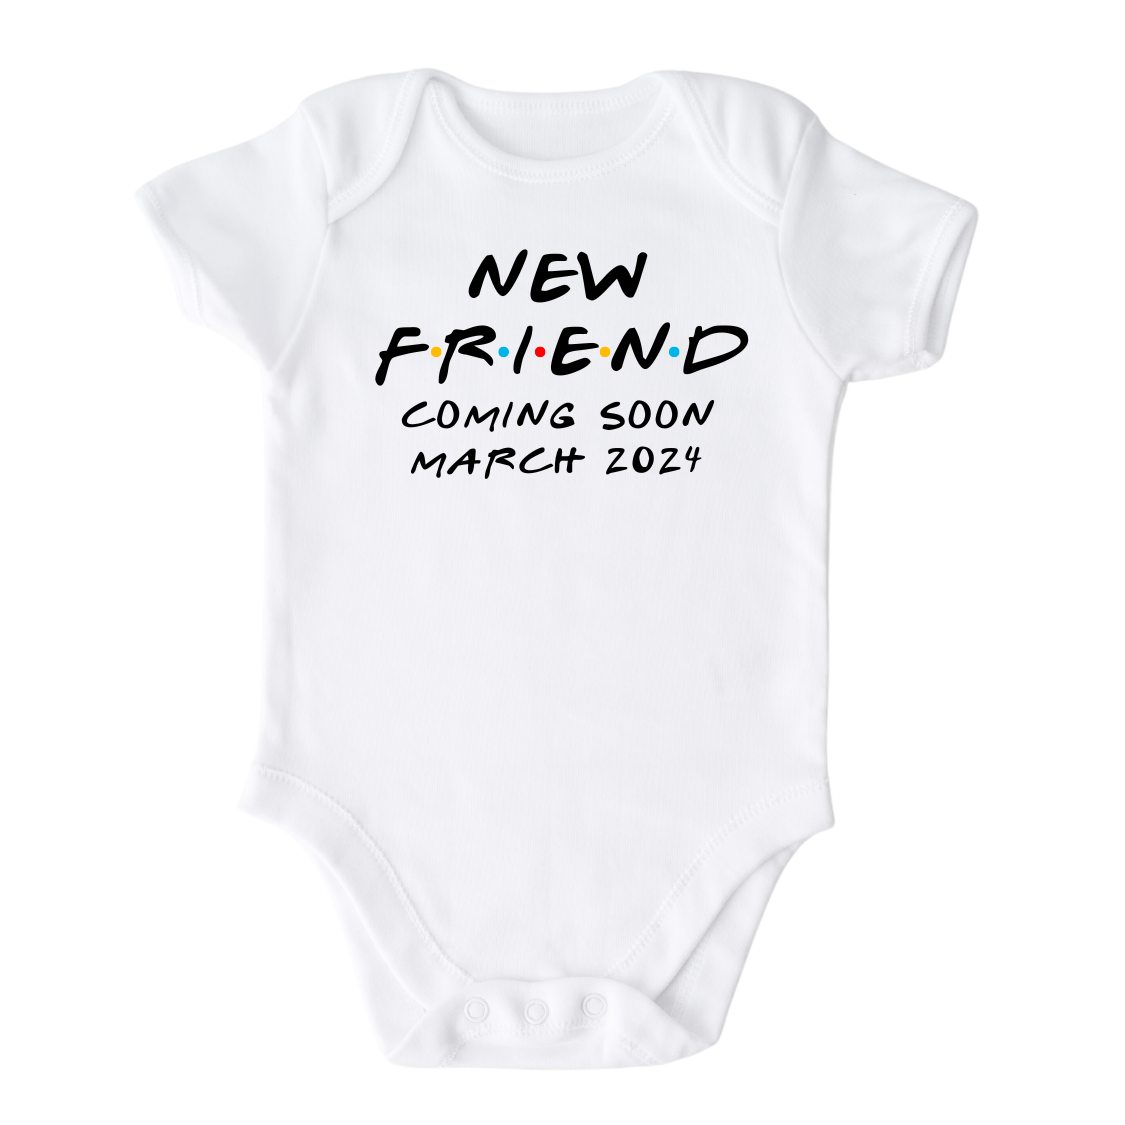 Cute Baby Onesie - Baby Gift - Baby Reveal Onesie Announcement with a cute New Friend Coming Soon; text design.